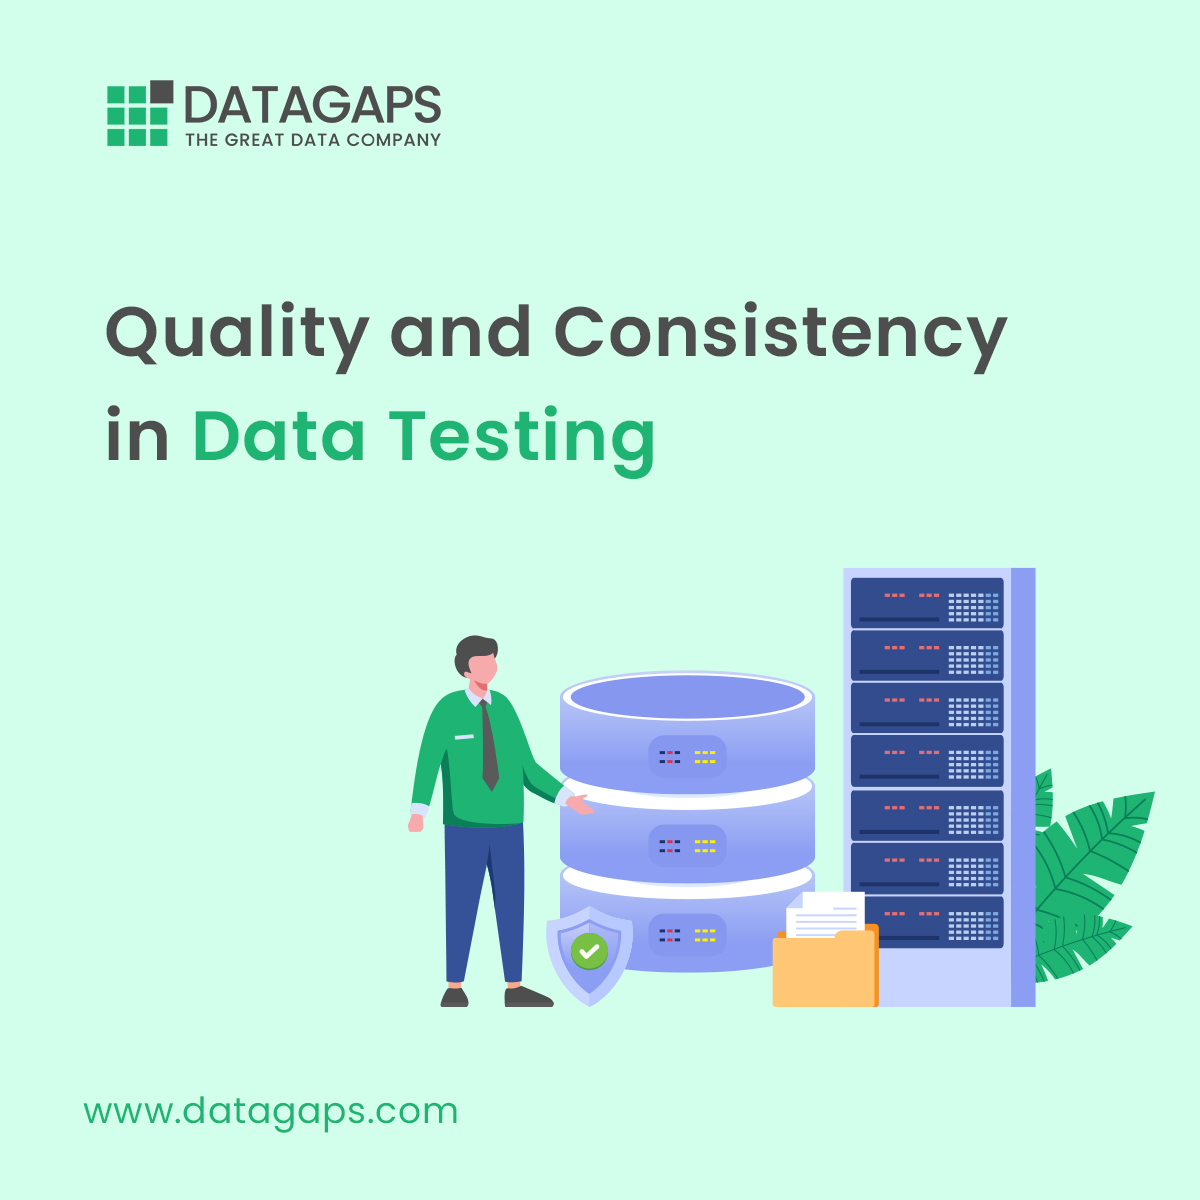 Maintaining quality and consistency in data testing is crucial, as lapses can pose business risks. Our ETL Validator guarantees high standards, ensuring reliable data. Step into a realm where data reliability is assured.
#DataValidationTesting #DataReliability #ETLValidation